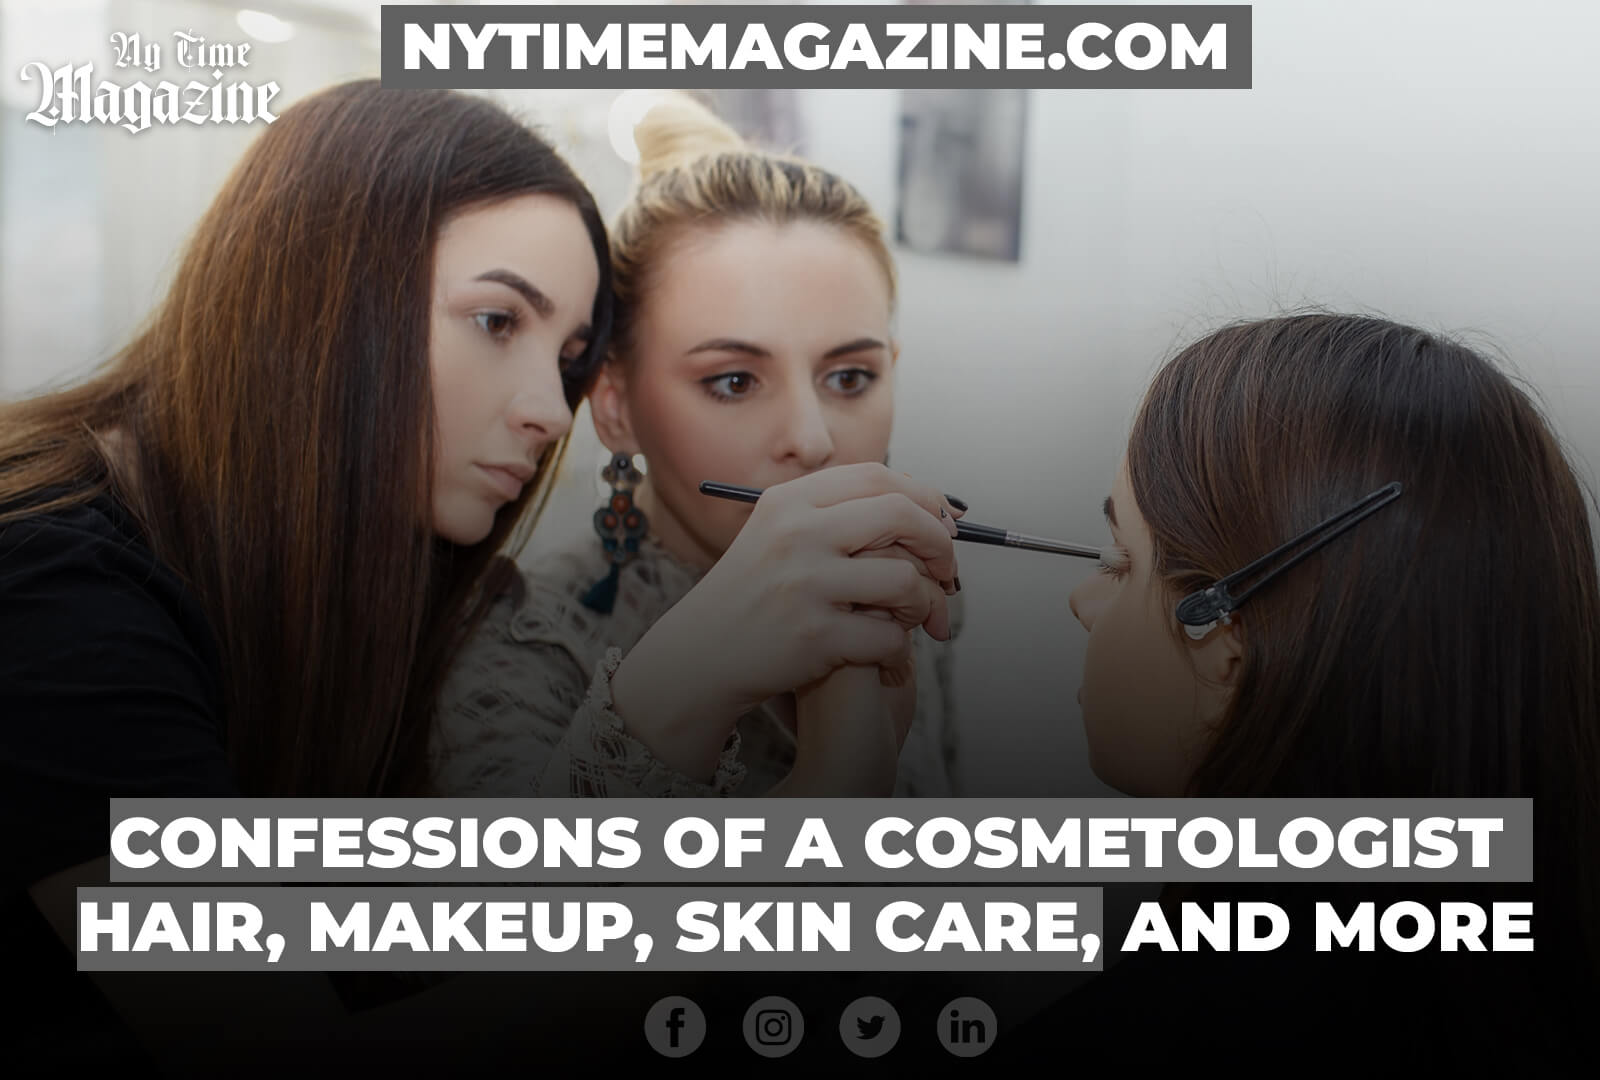 CONFESSIONS OF A COSMETOLOGIST: HAIR, MAKEUP, SKIN CARE, AND MORE